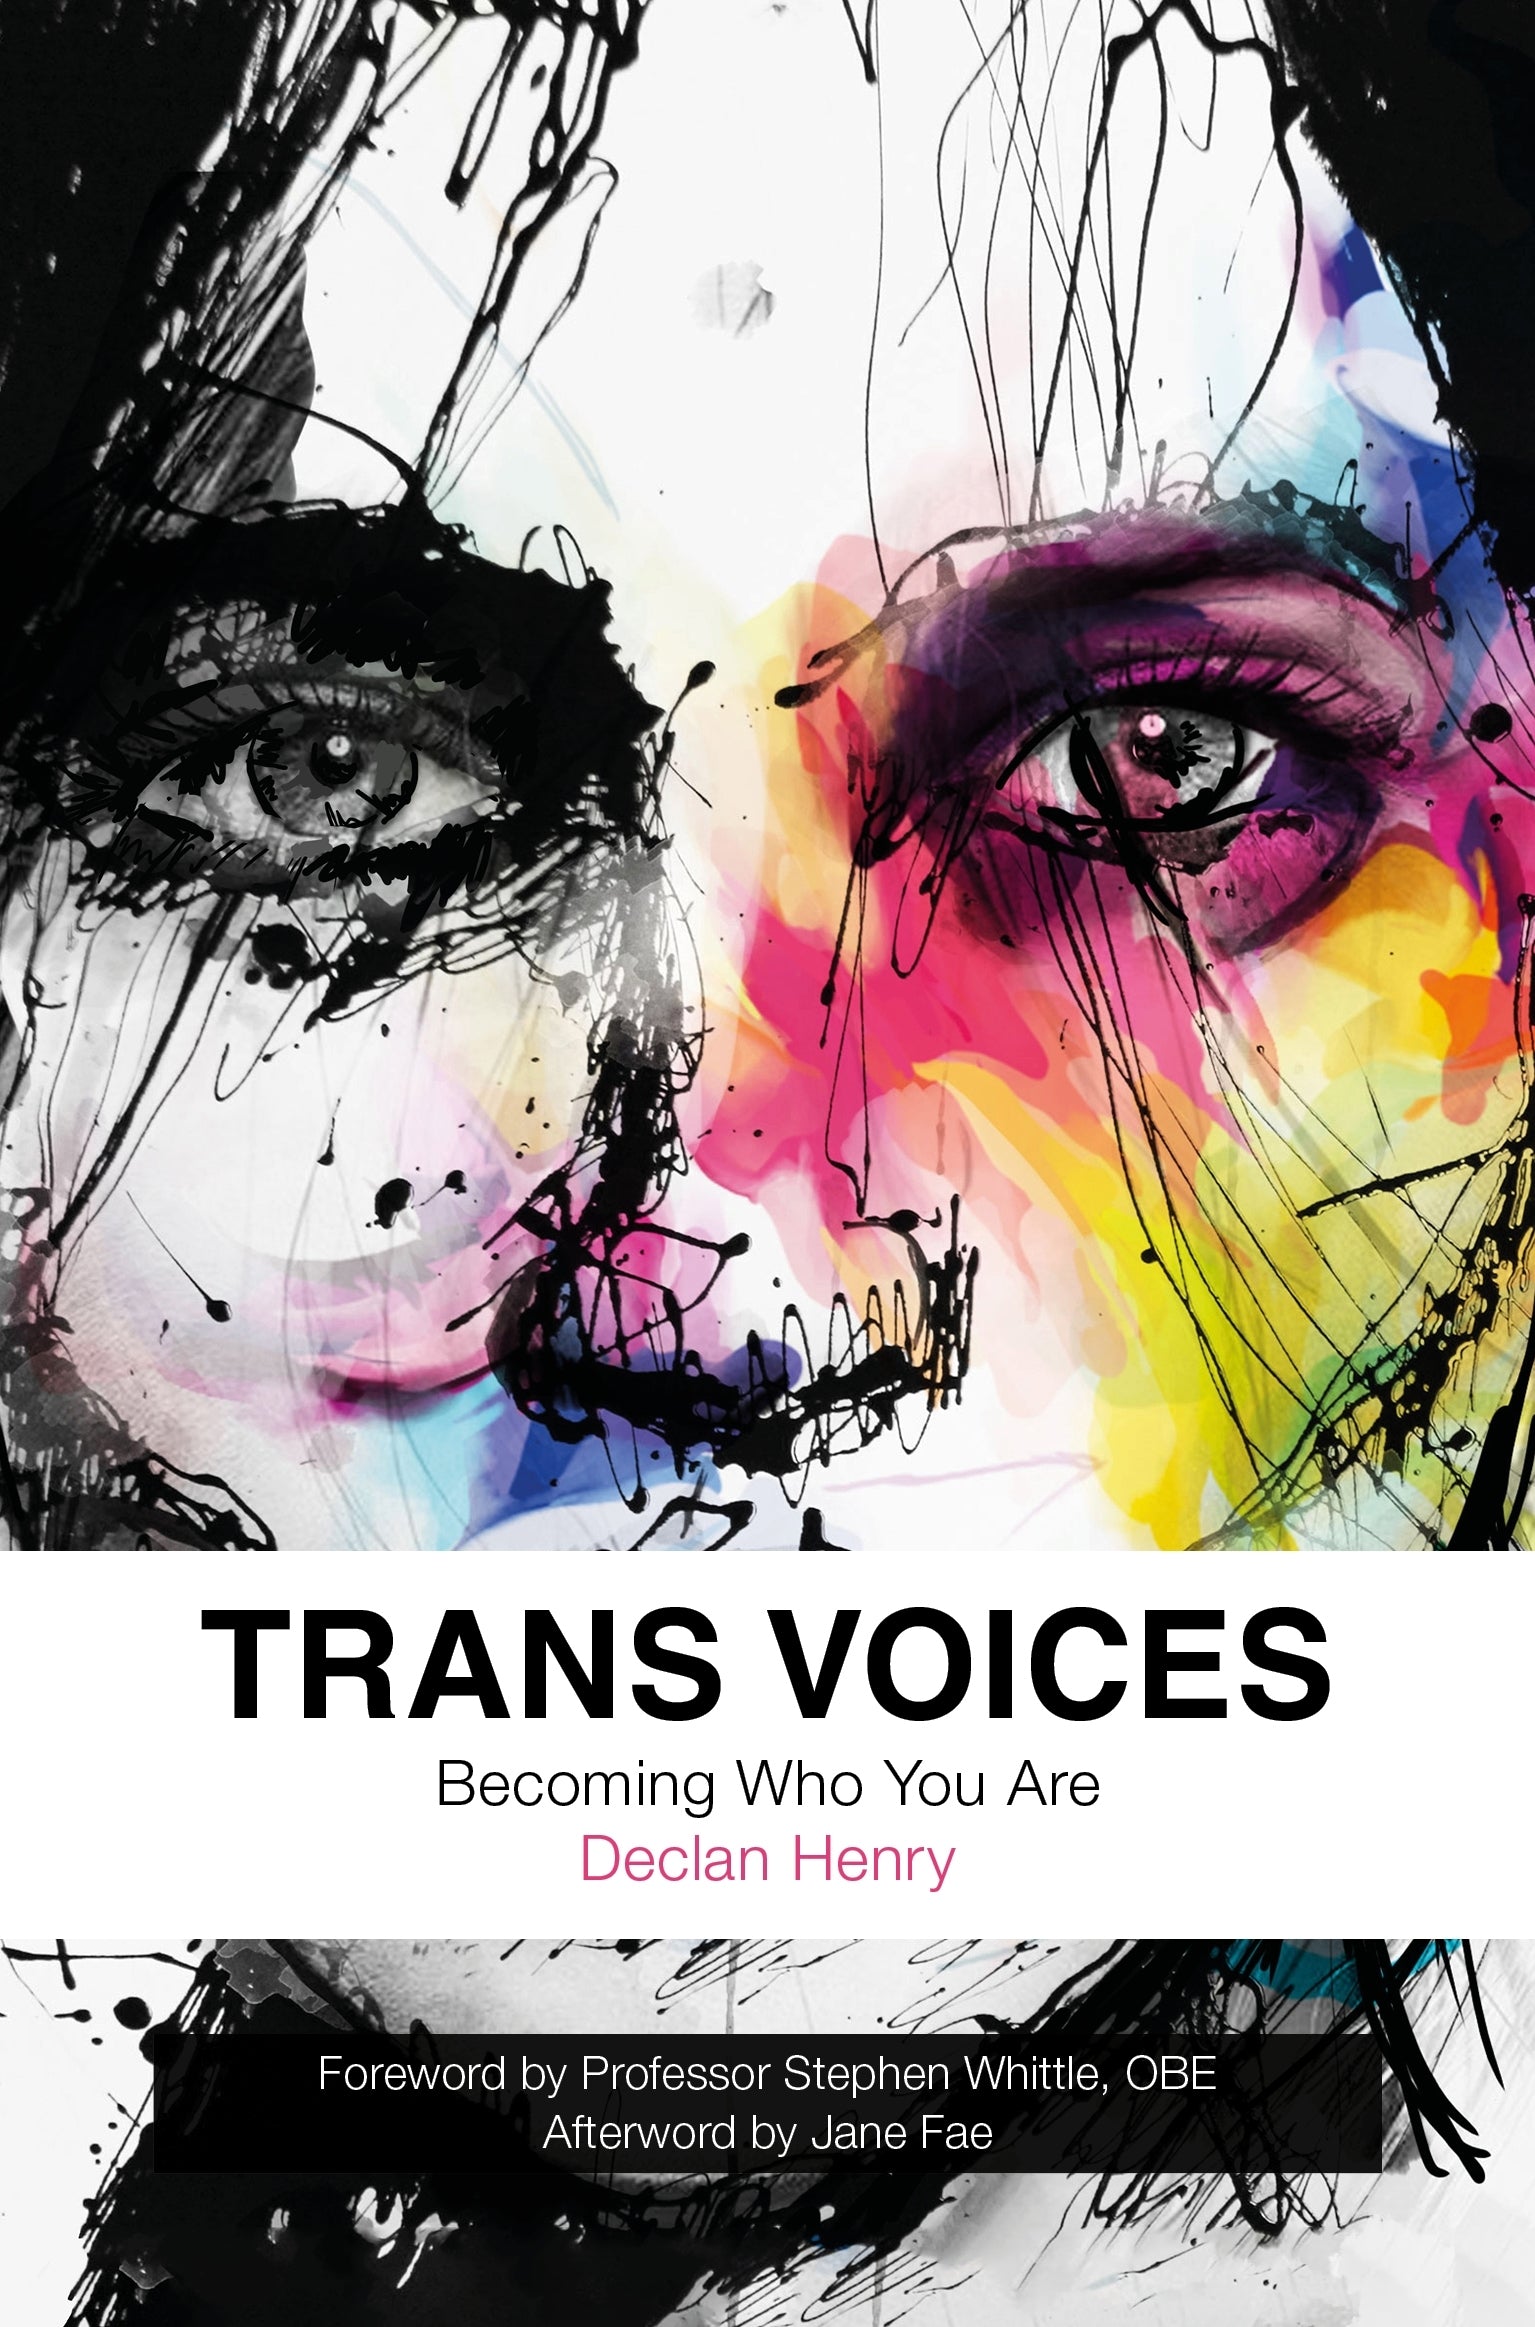 Trans Voices by Declan Henry, Stephen Whittle, Jane Fae